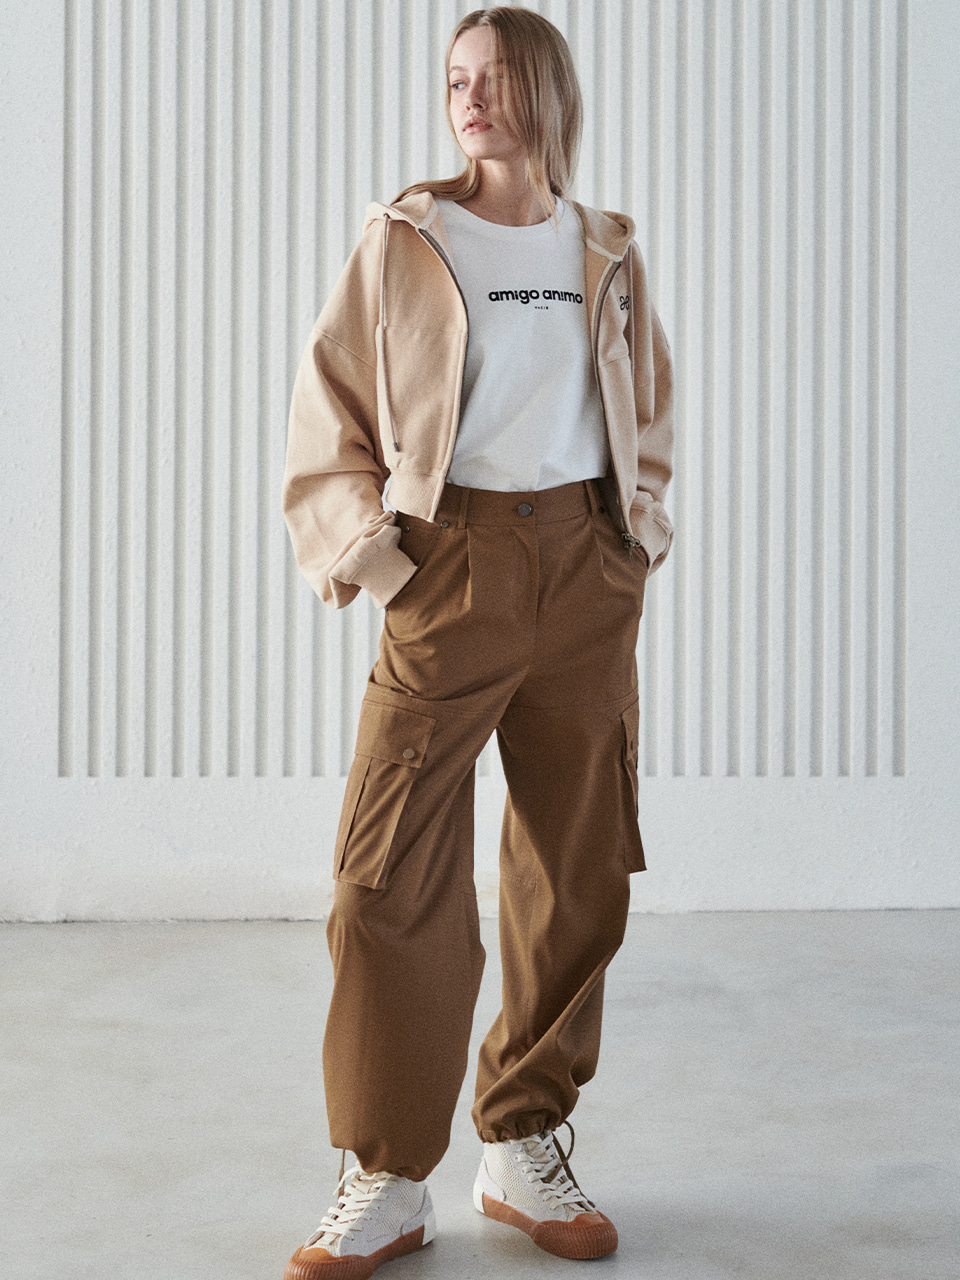 HACIE - CARGO PANTS WITH BINDING DETAIL [3COLOR]